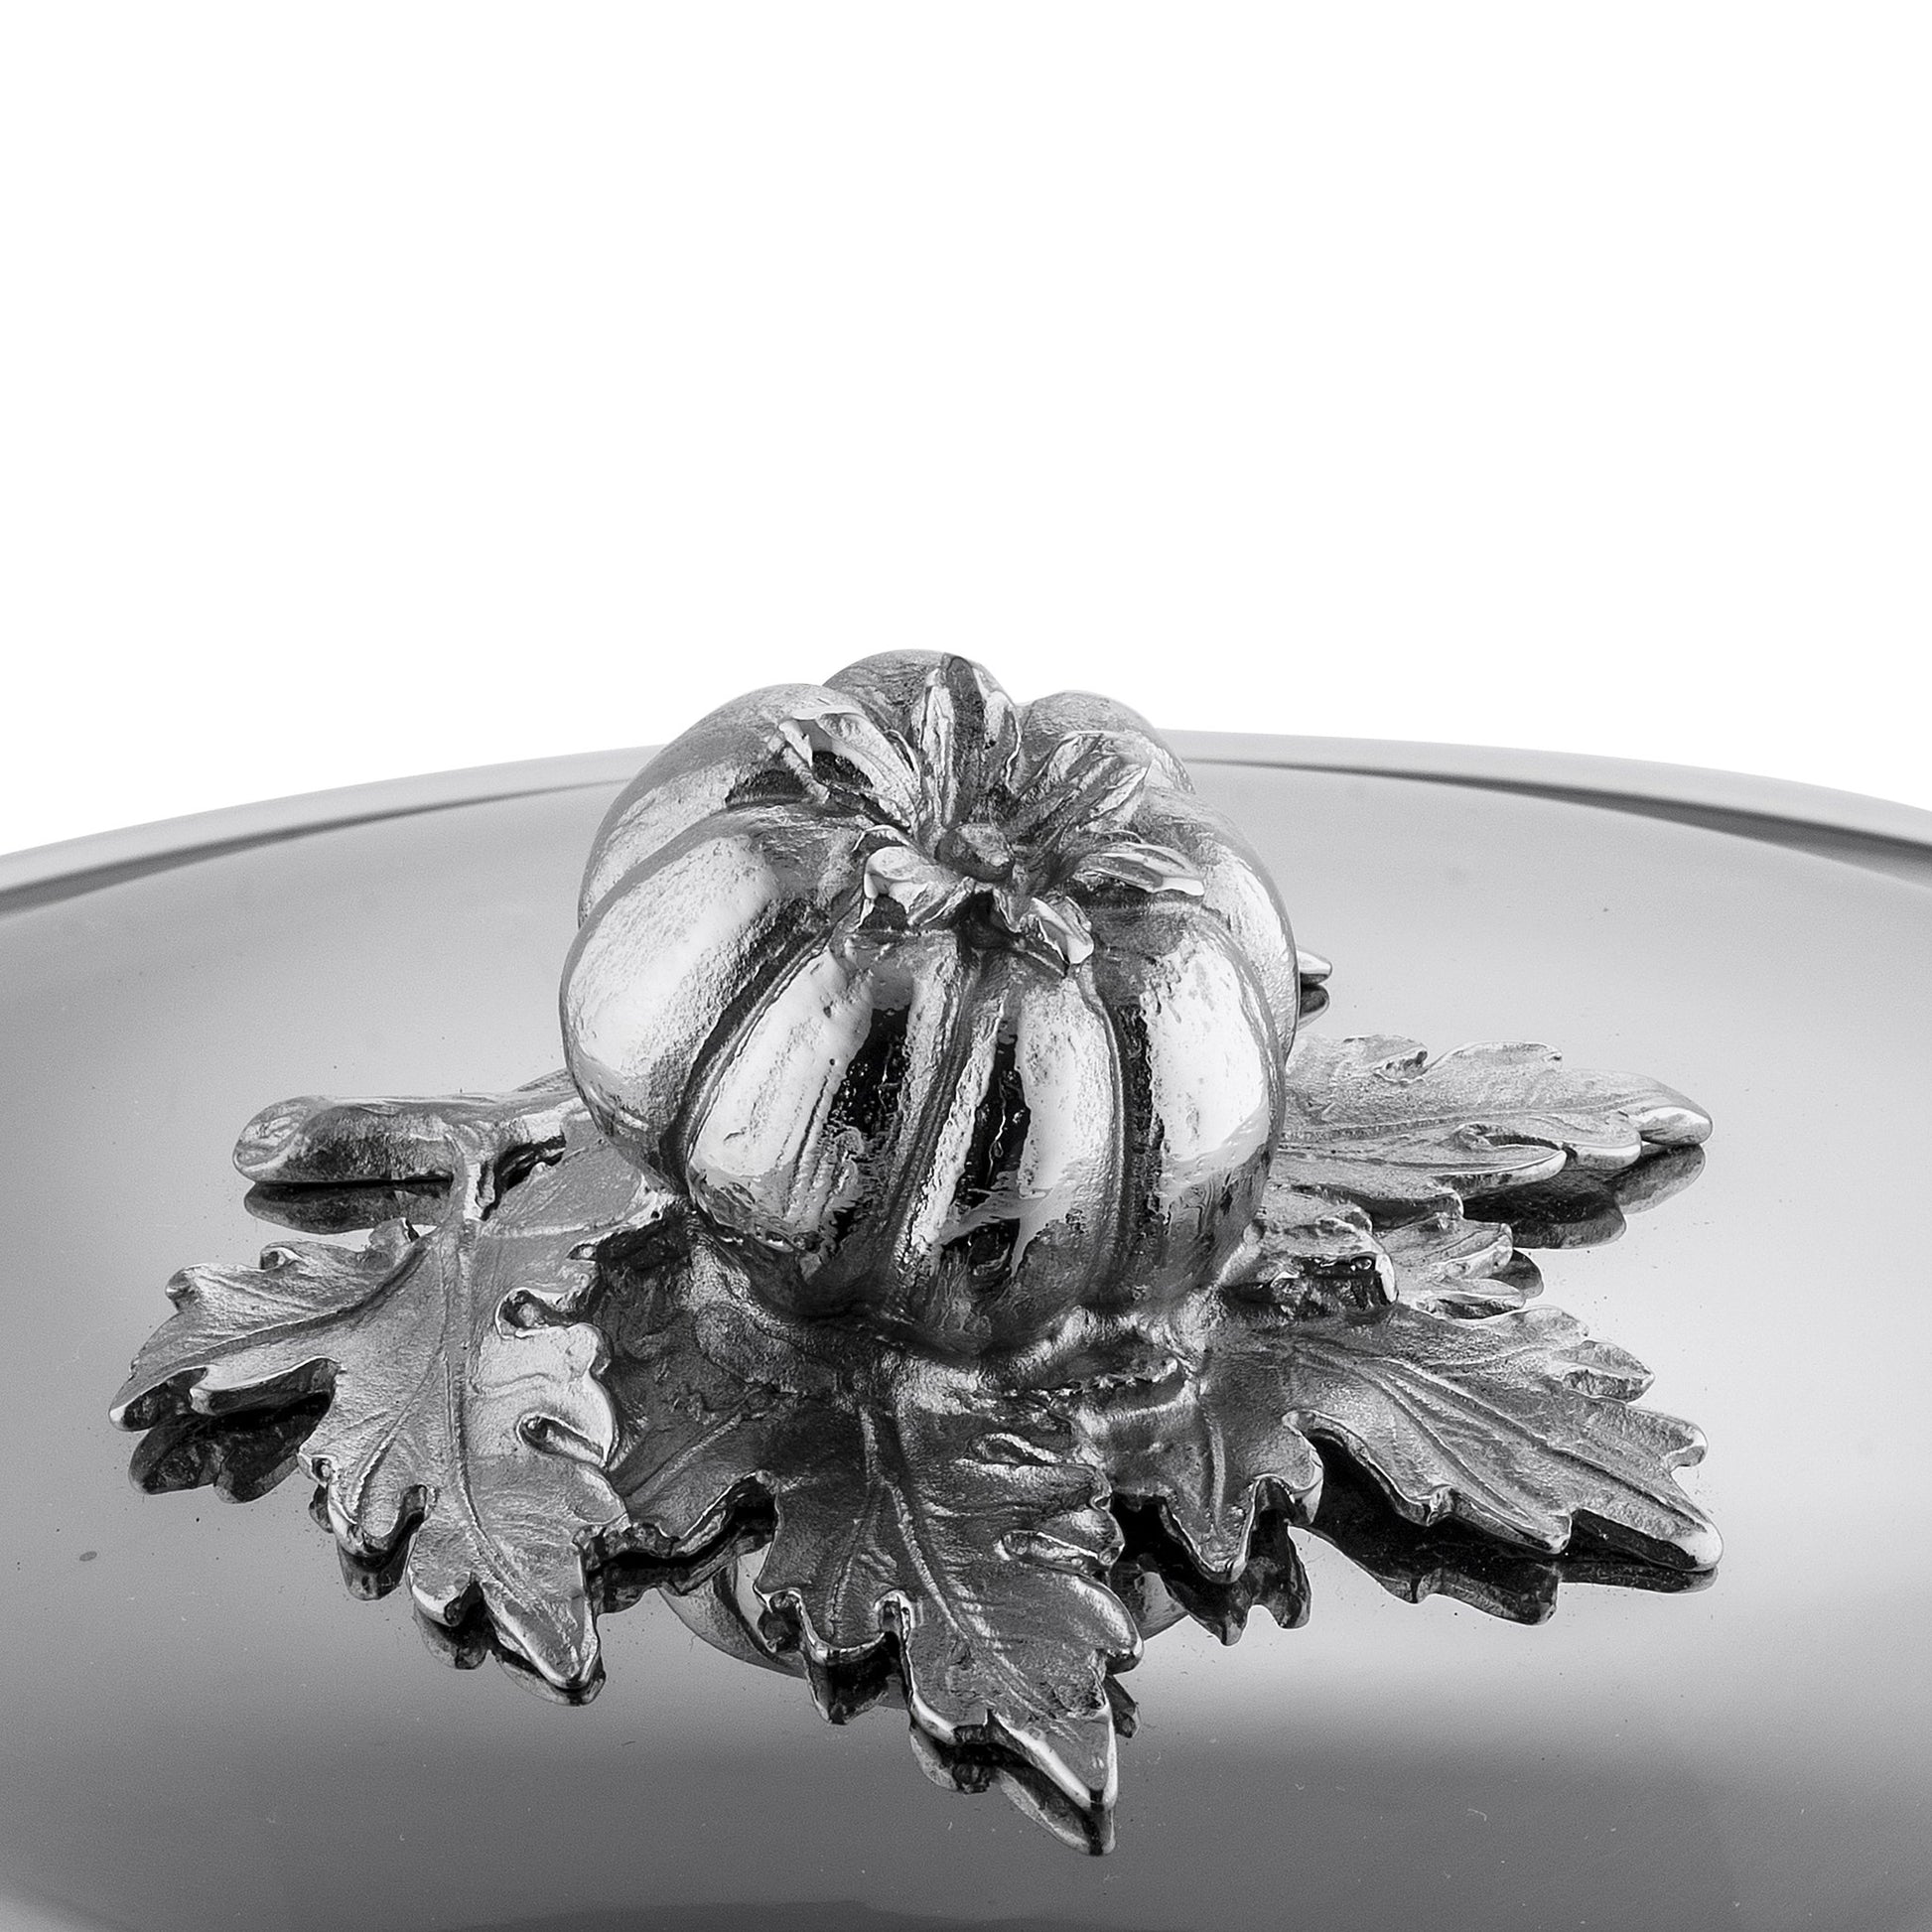 Decorated knob finial representing fennel, tomato, cast in solid bronze and silver plated, on Opus Prima stainless steel lid by Ruffoni